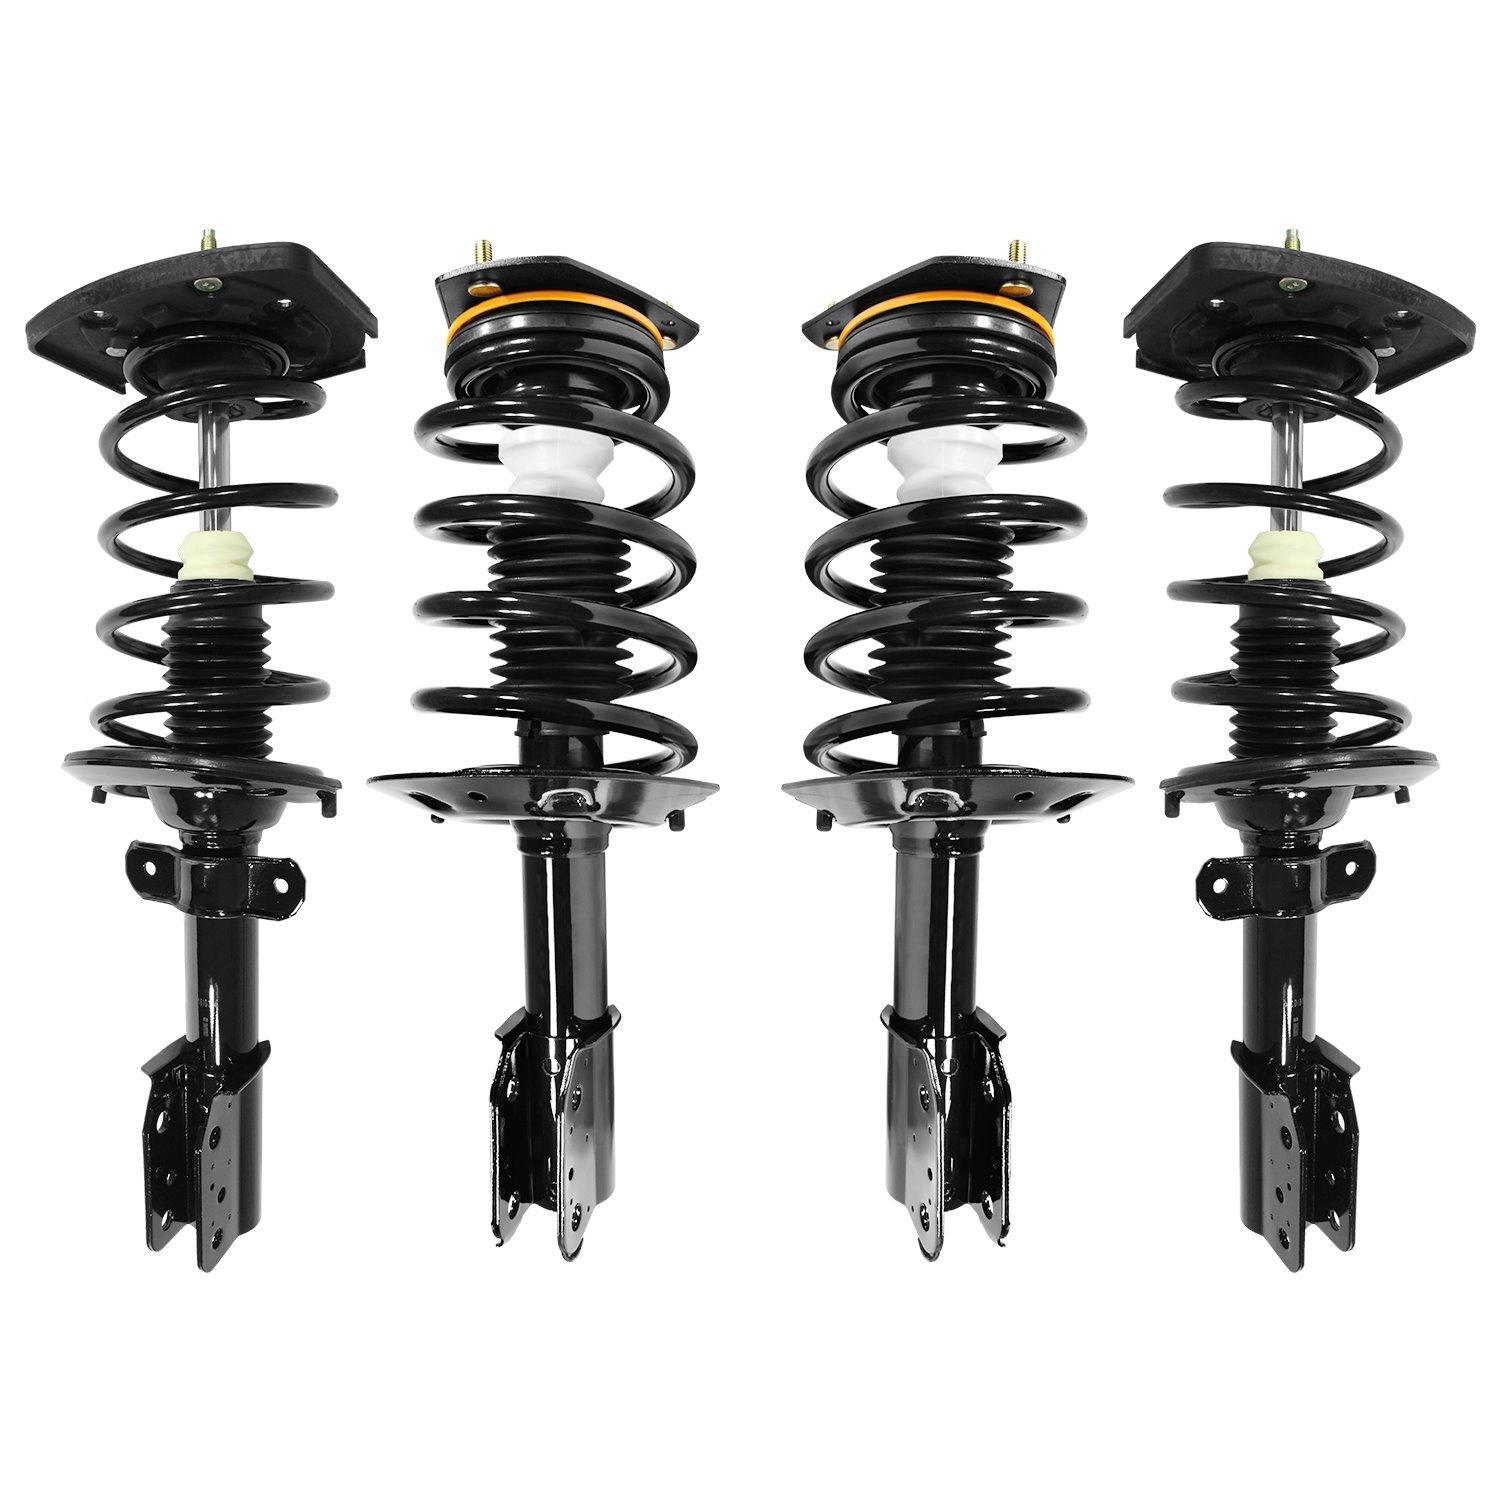 4-11130-15313-001 Front & Rear Suspension Strut & Coil Spring Assembly Kit Fits Select Chevy Impala